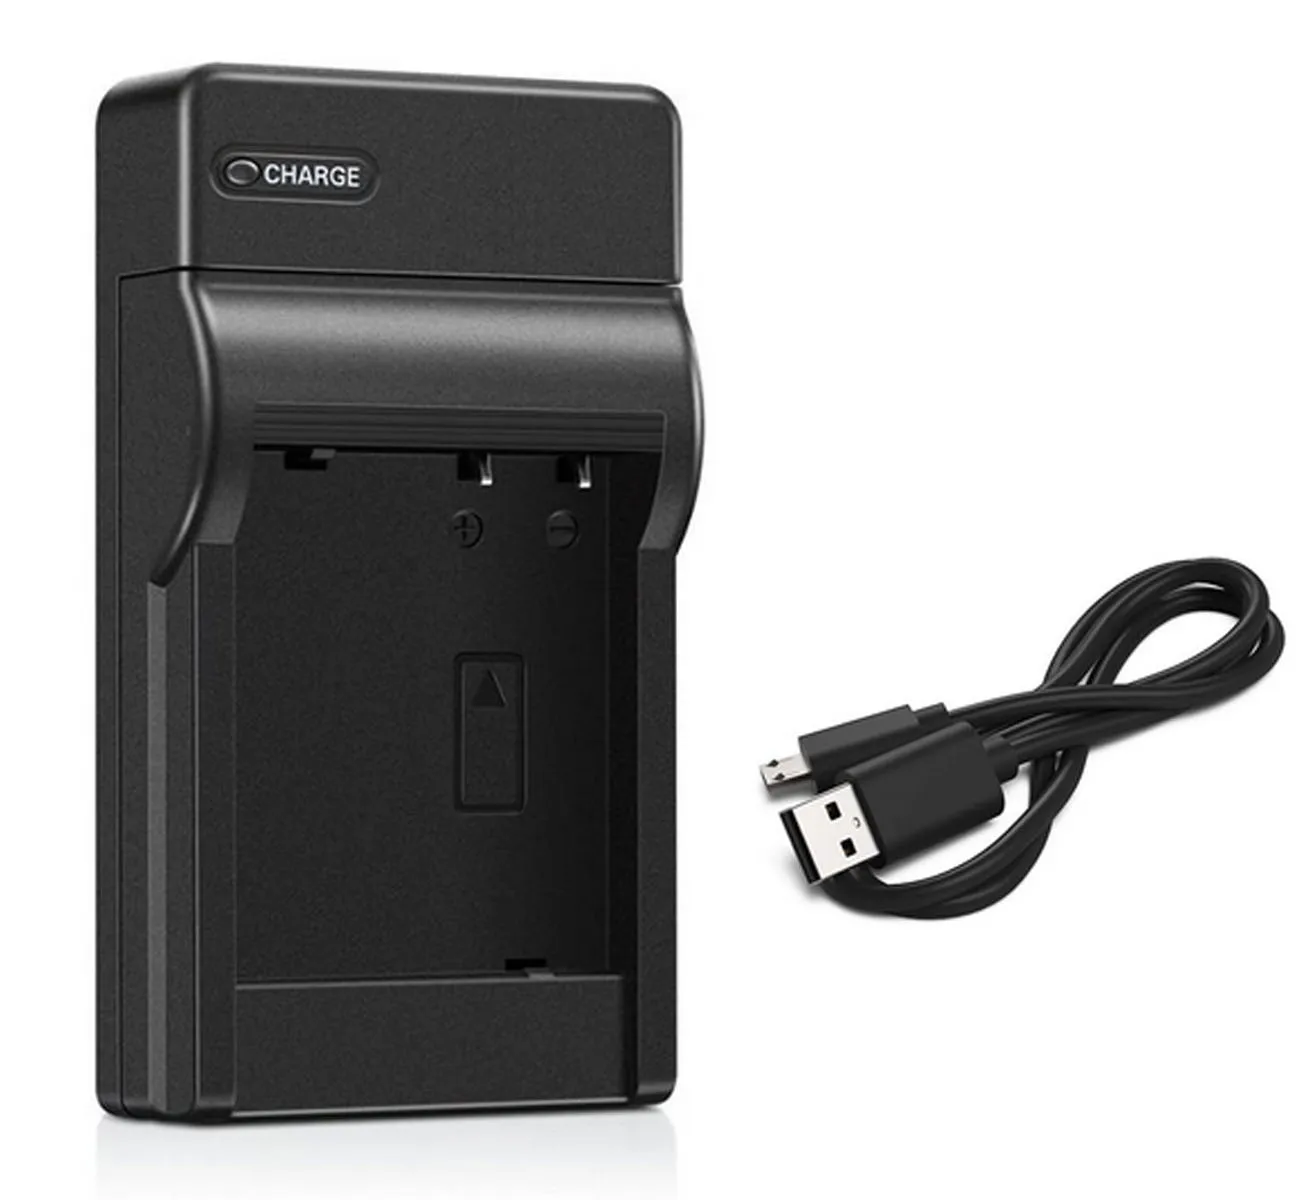 Battery Charger for Kodak EasyShare M320, M340, M341, M753 Zoom, M763, M853, M863, M893 IS, M893IS Digital Camera